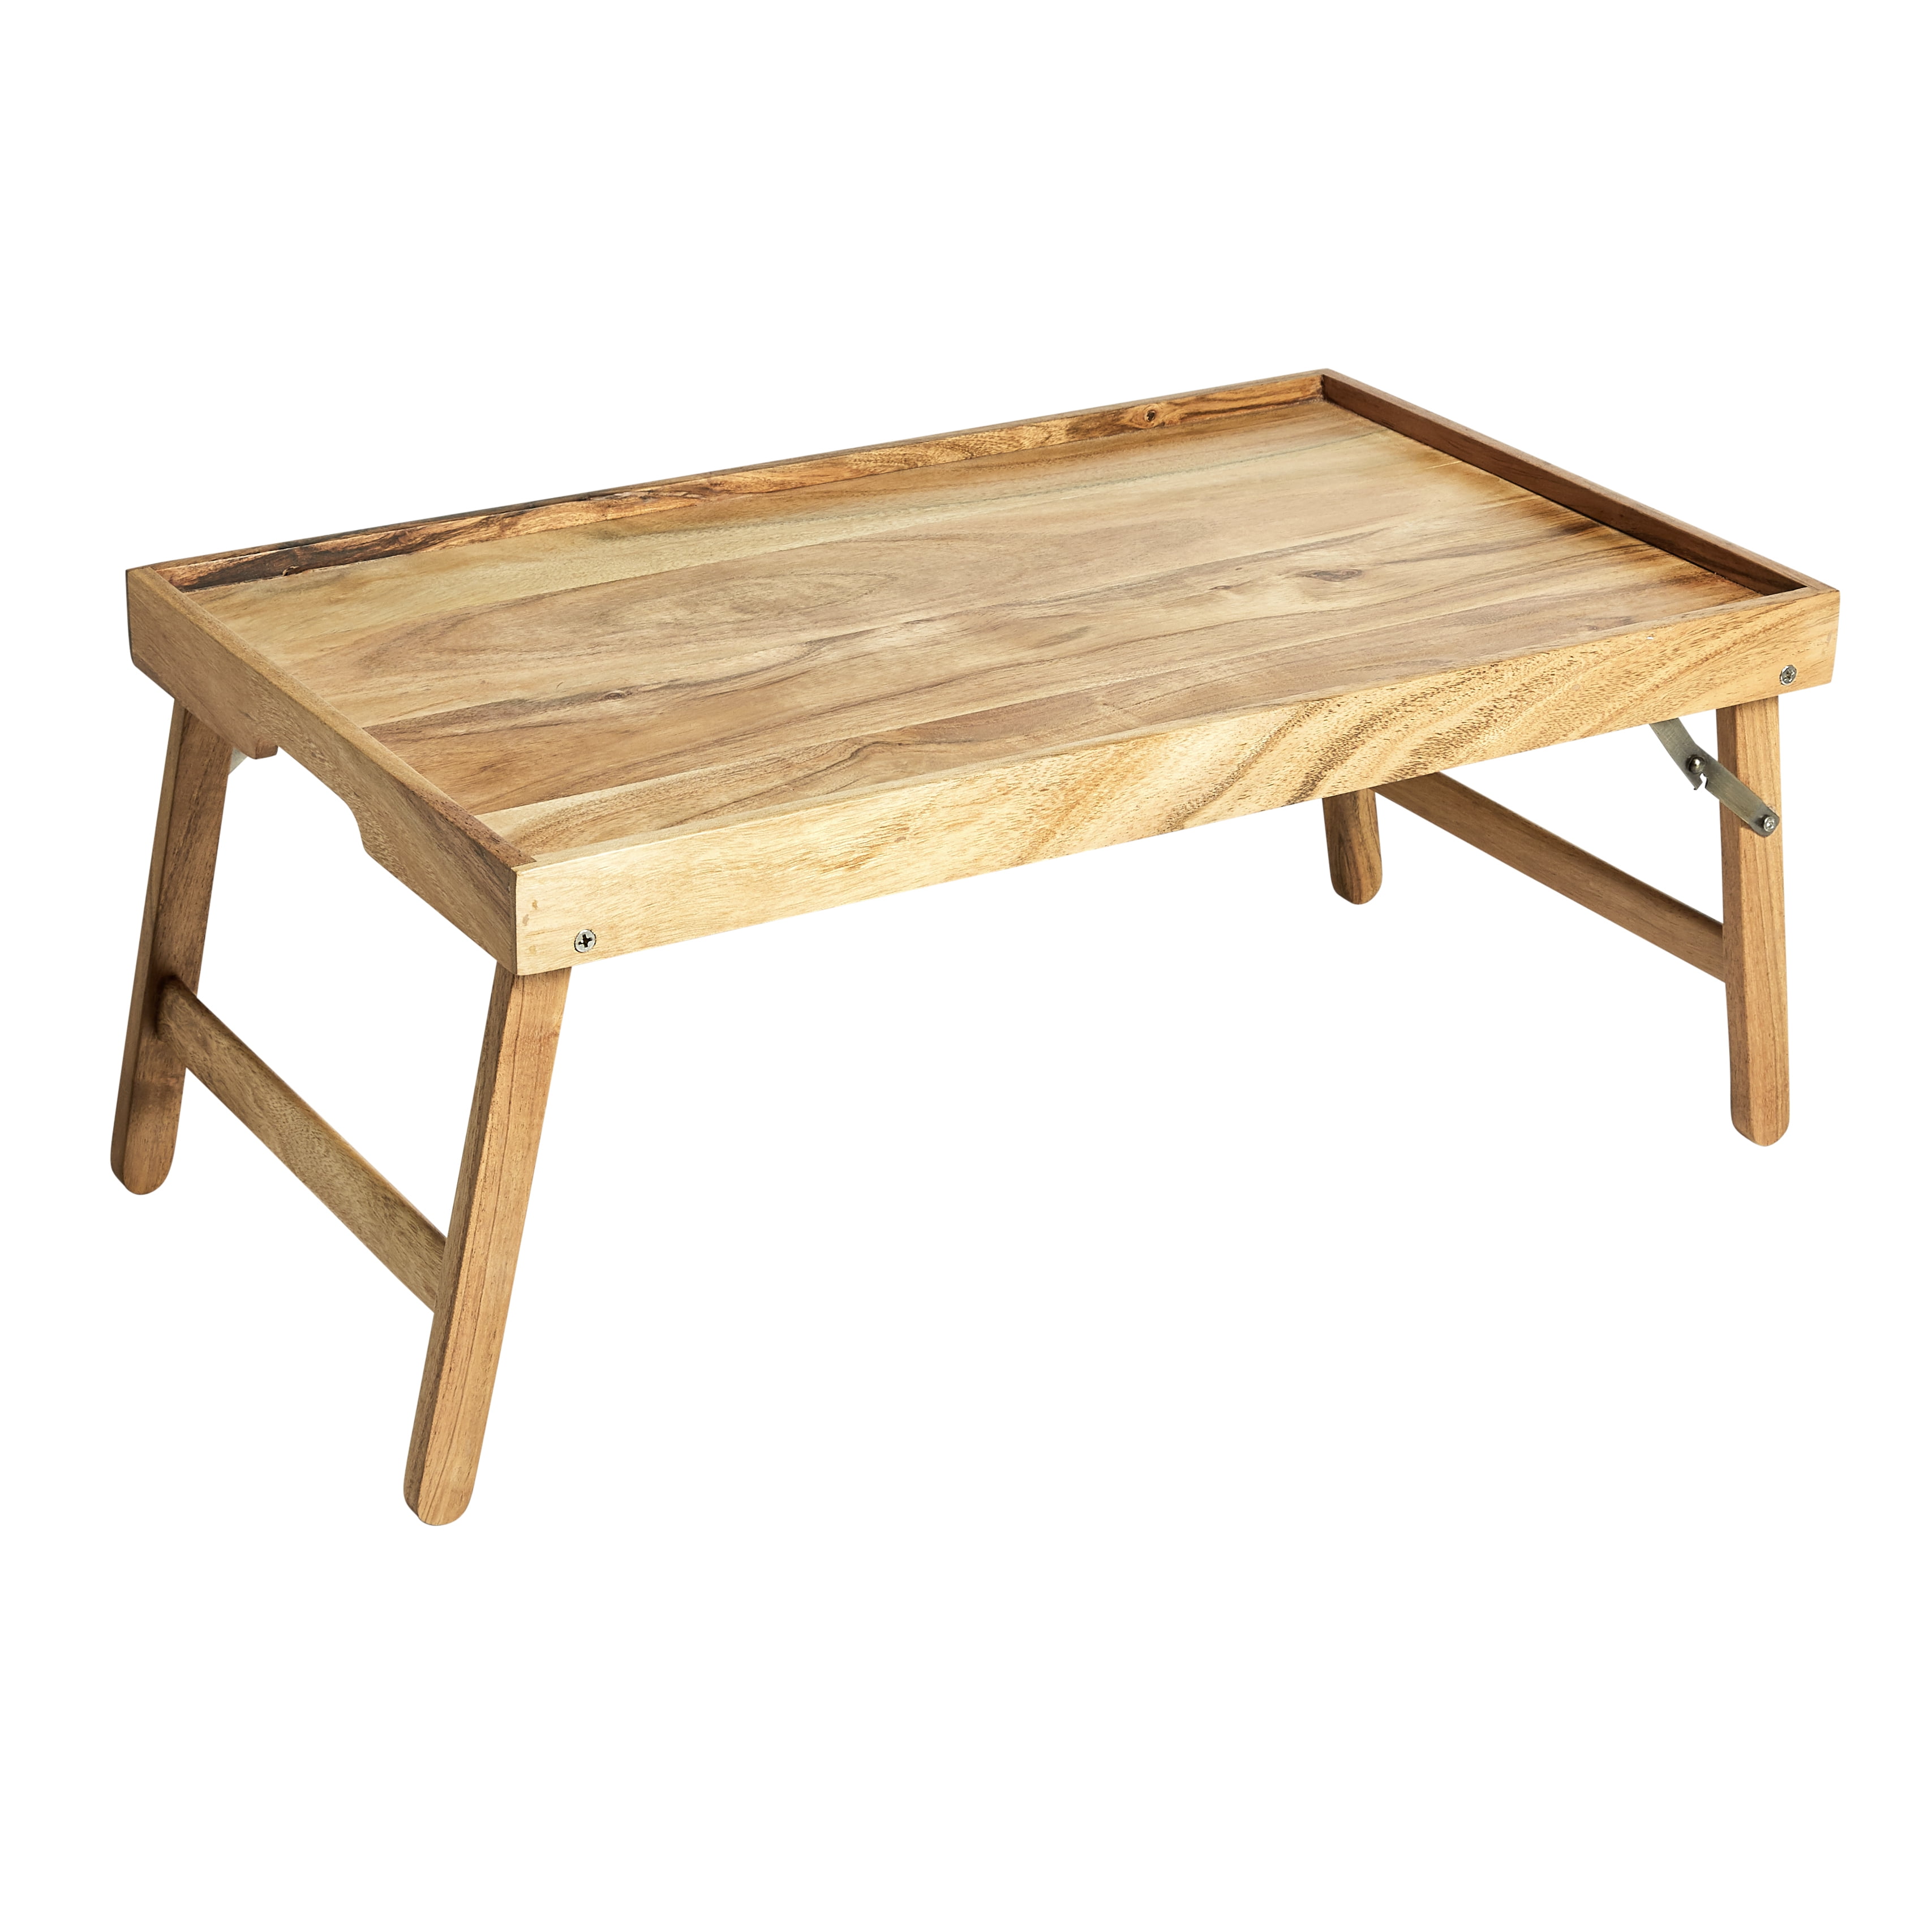 StoreSmith Folding Acacia Tray Table with Removable Tray